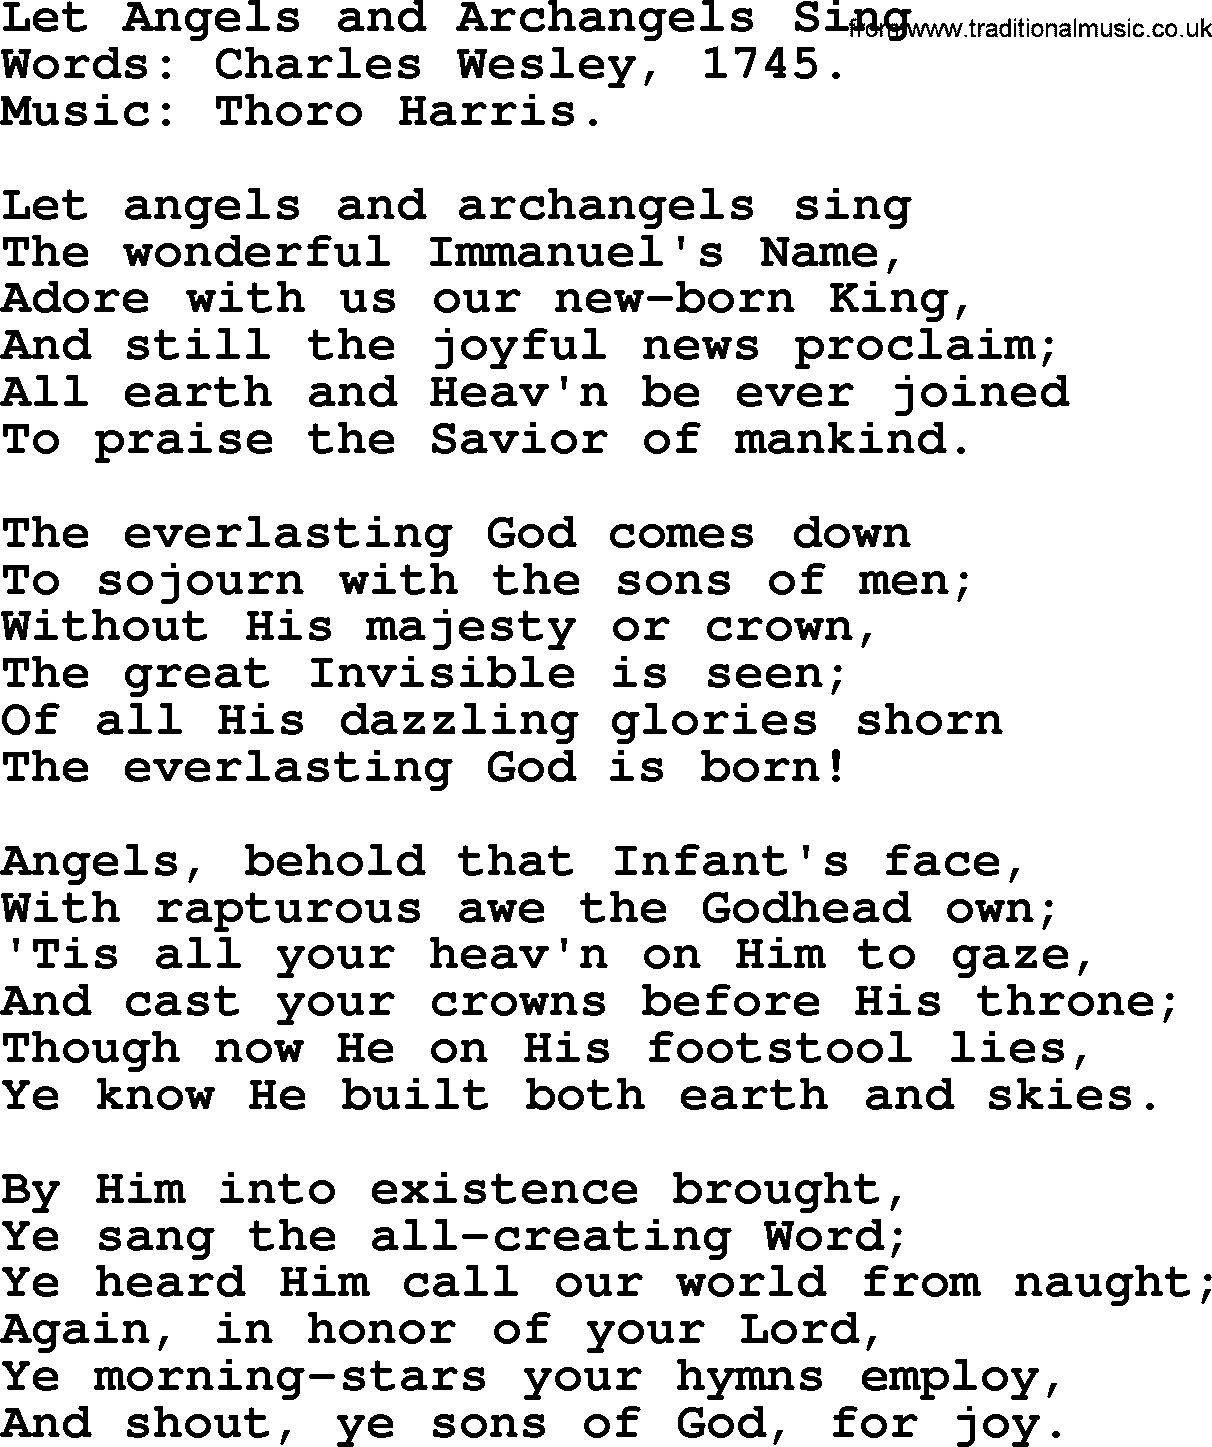 Hymns about Angels, Hymn: Let Angels And Archangels Sing.txt lyrics with PDF